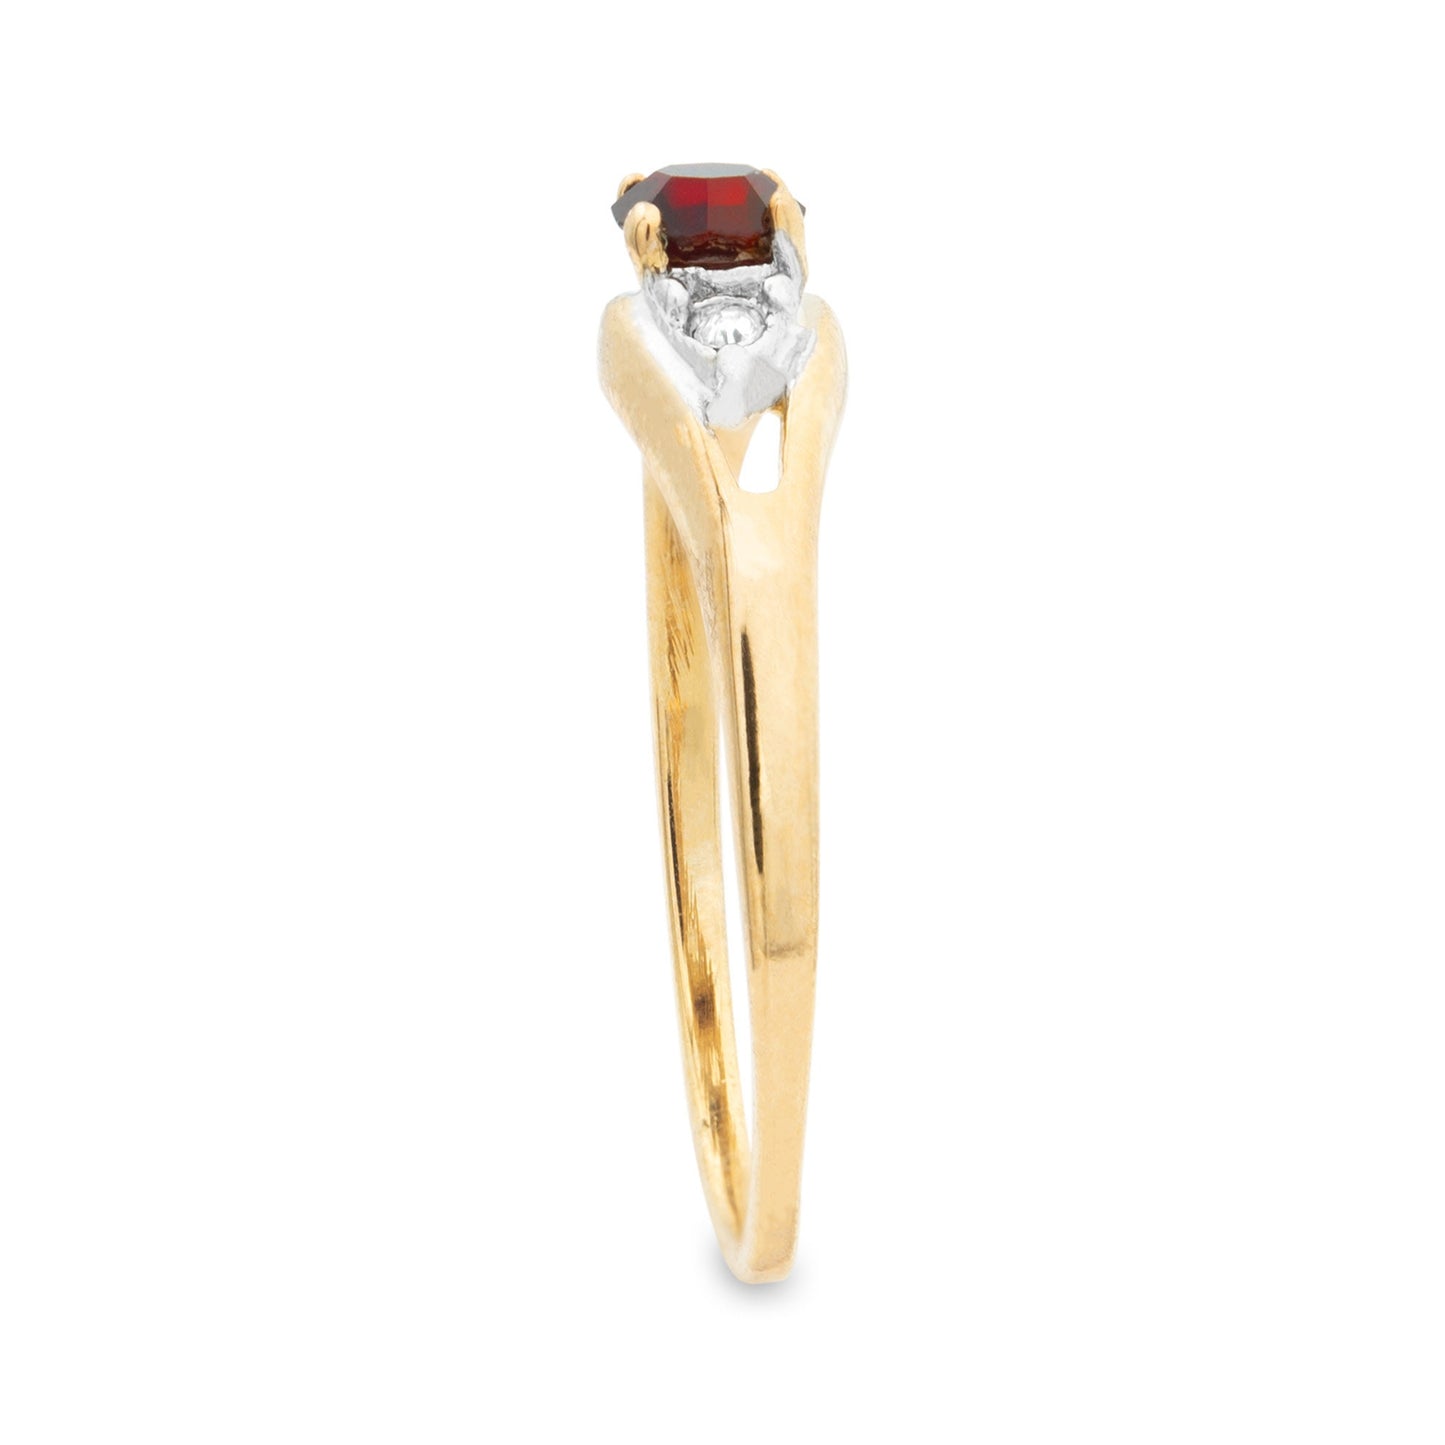 Vintage Garnet and Clear Austrian Crystal Accents 18k Yellow Gold Electroplated Ring Made in the USA Size 5